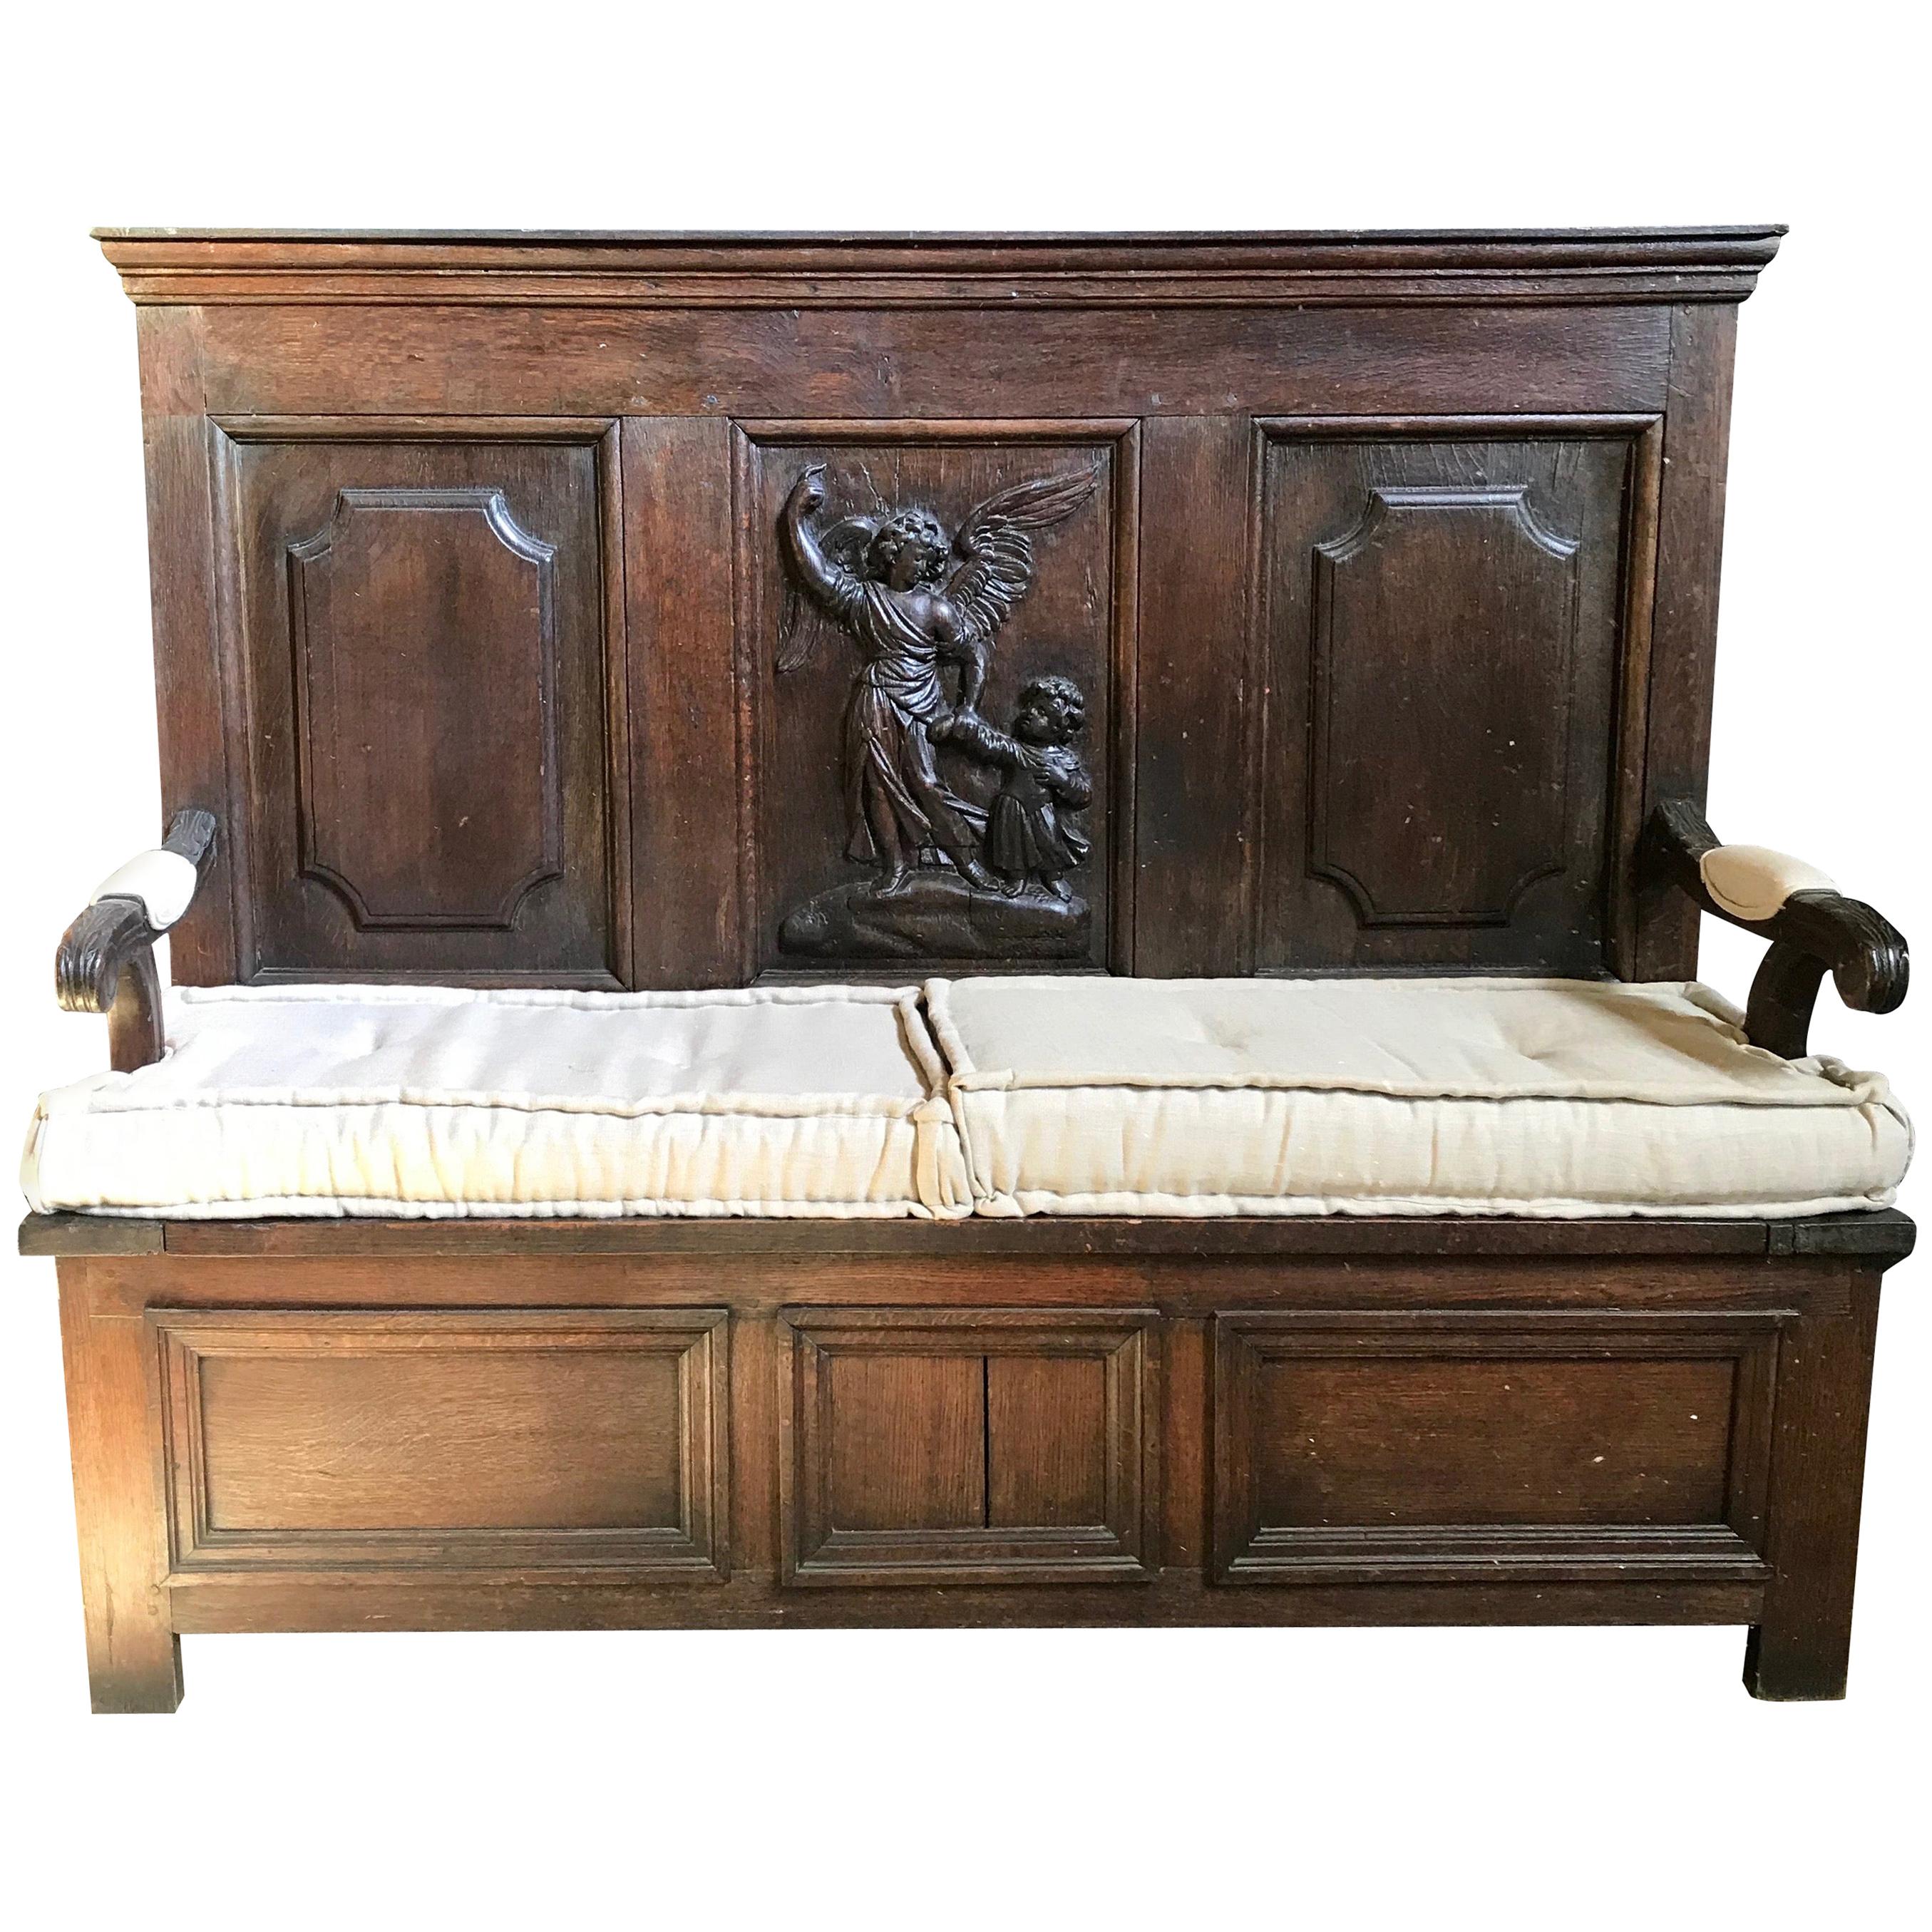 Impressive Romantic French Bench with Carved Angel and Storage Under Seat